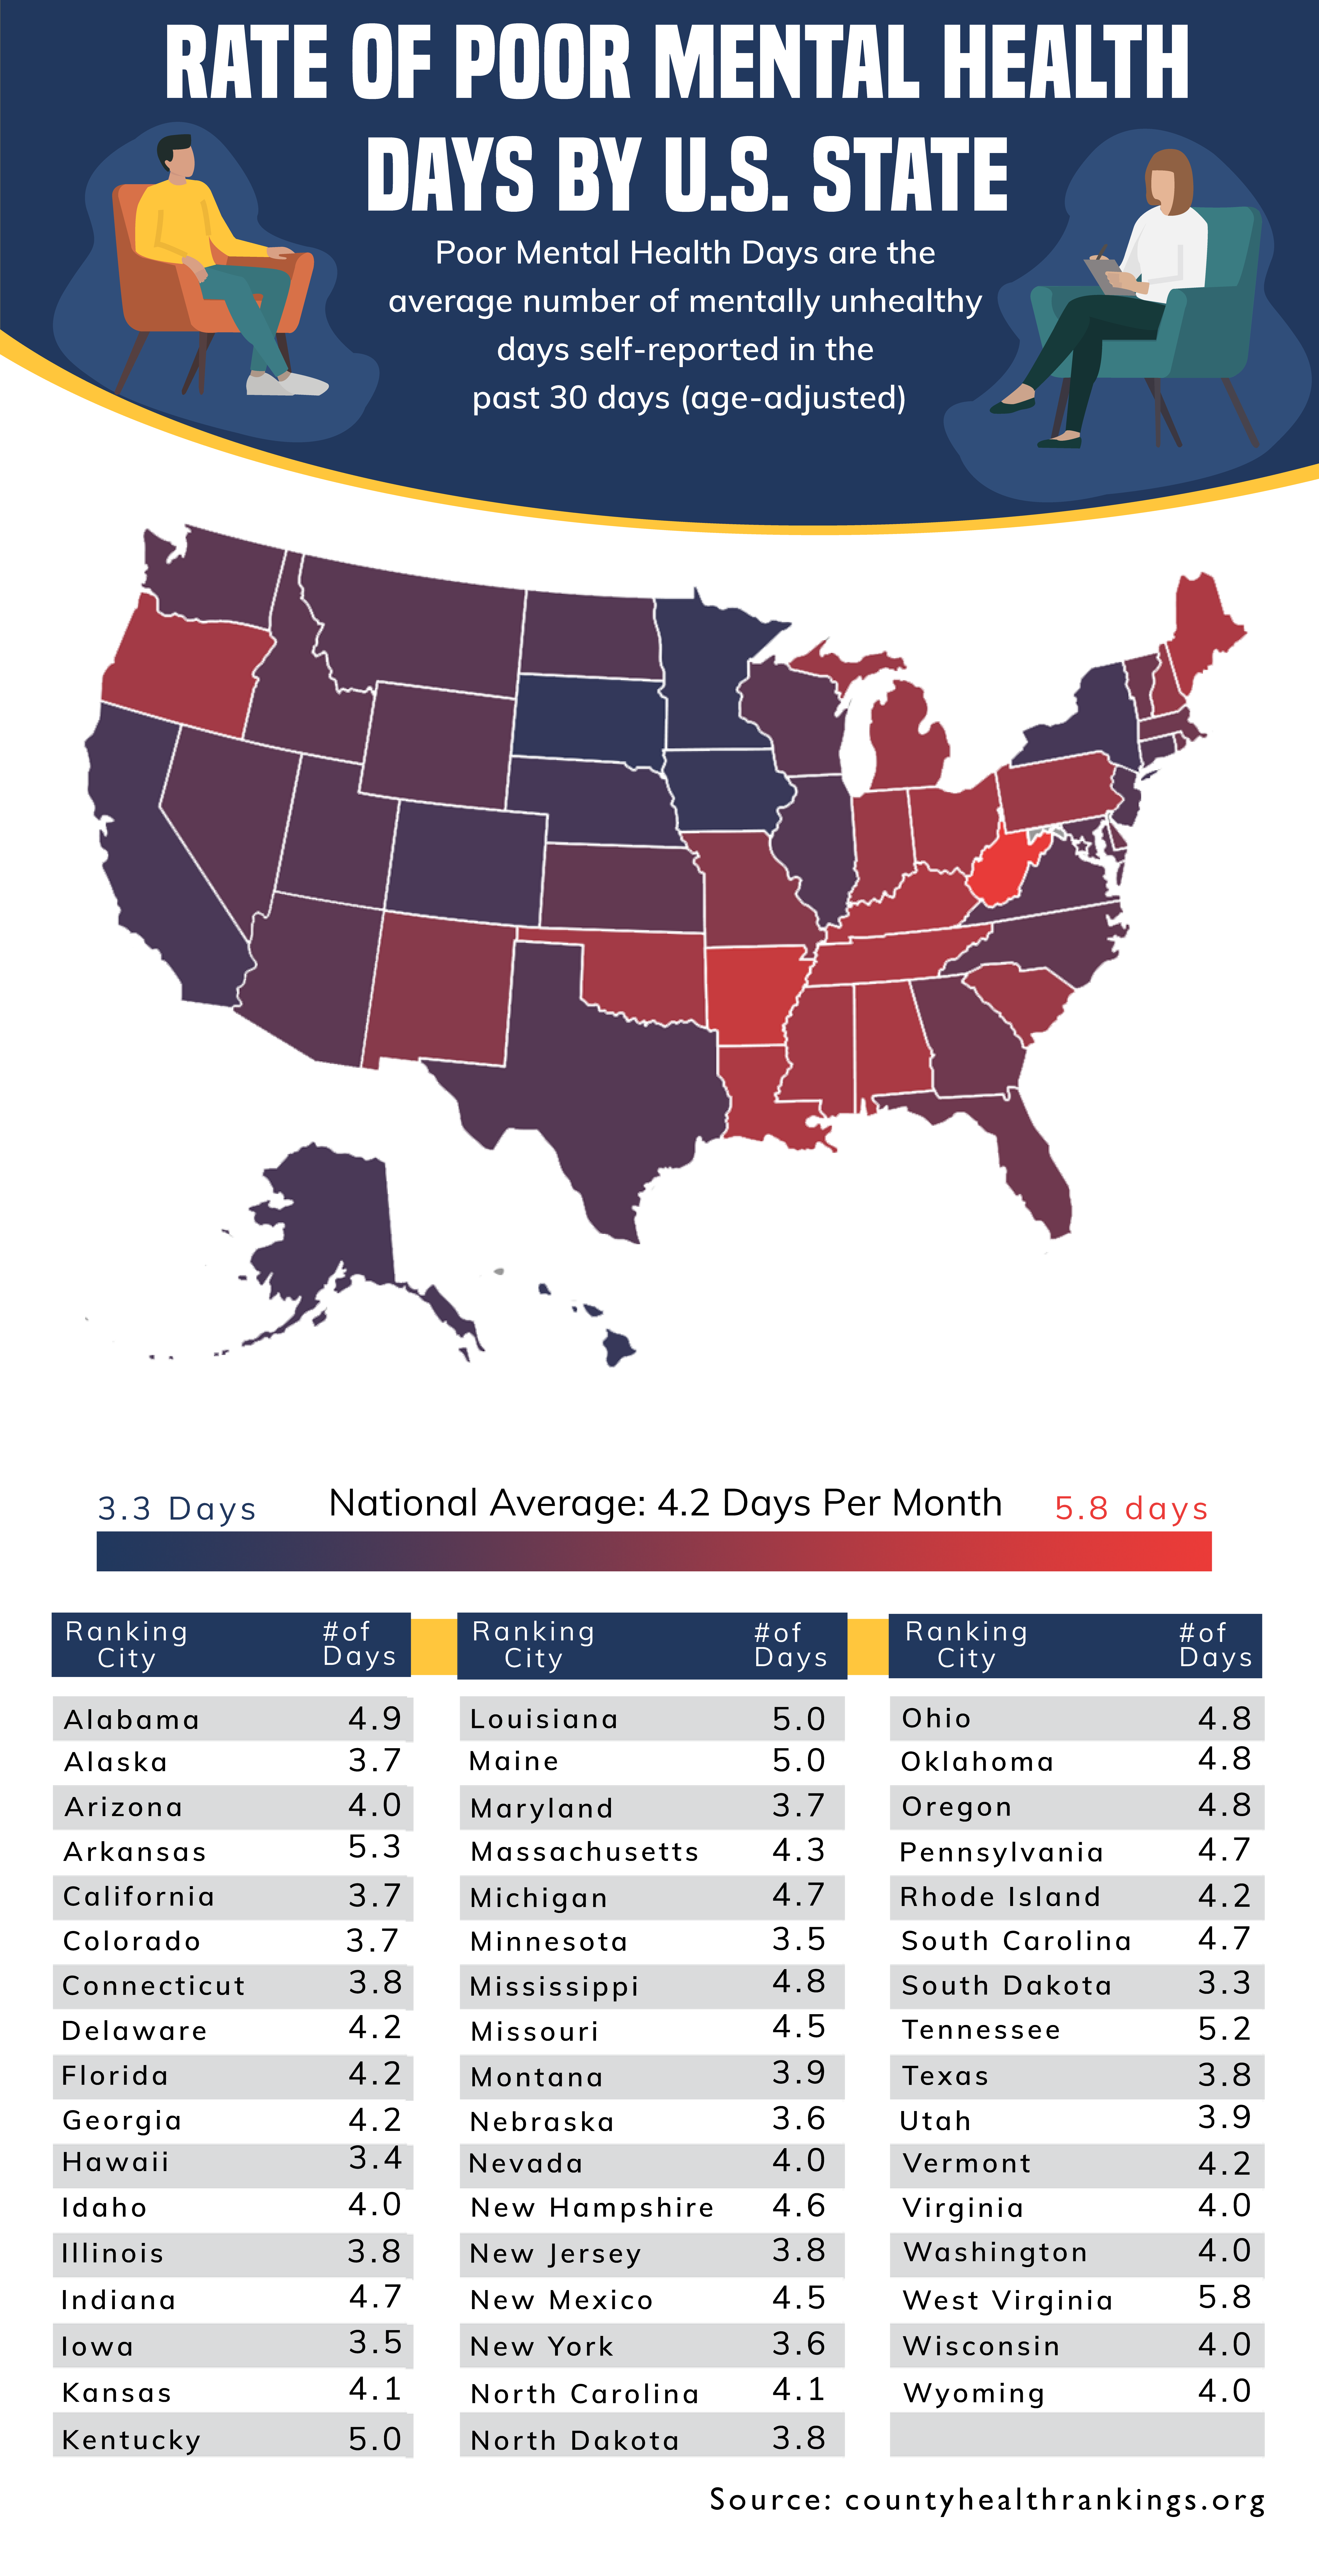 A map showing the average number of poor mental health days by state